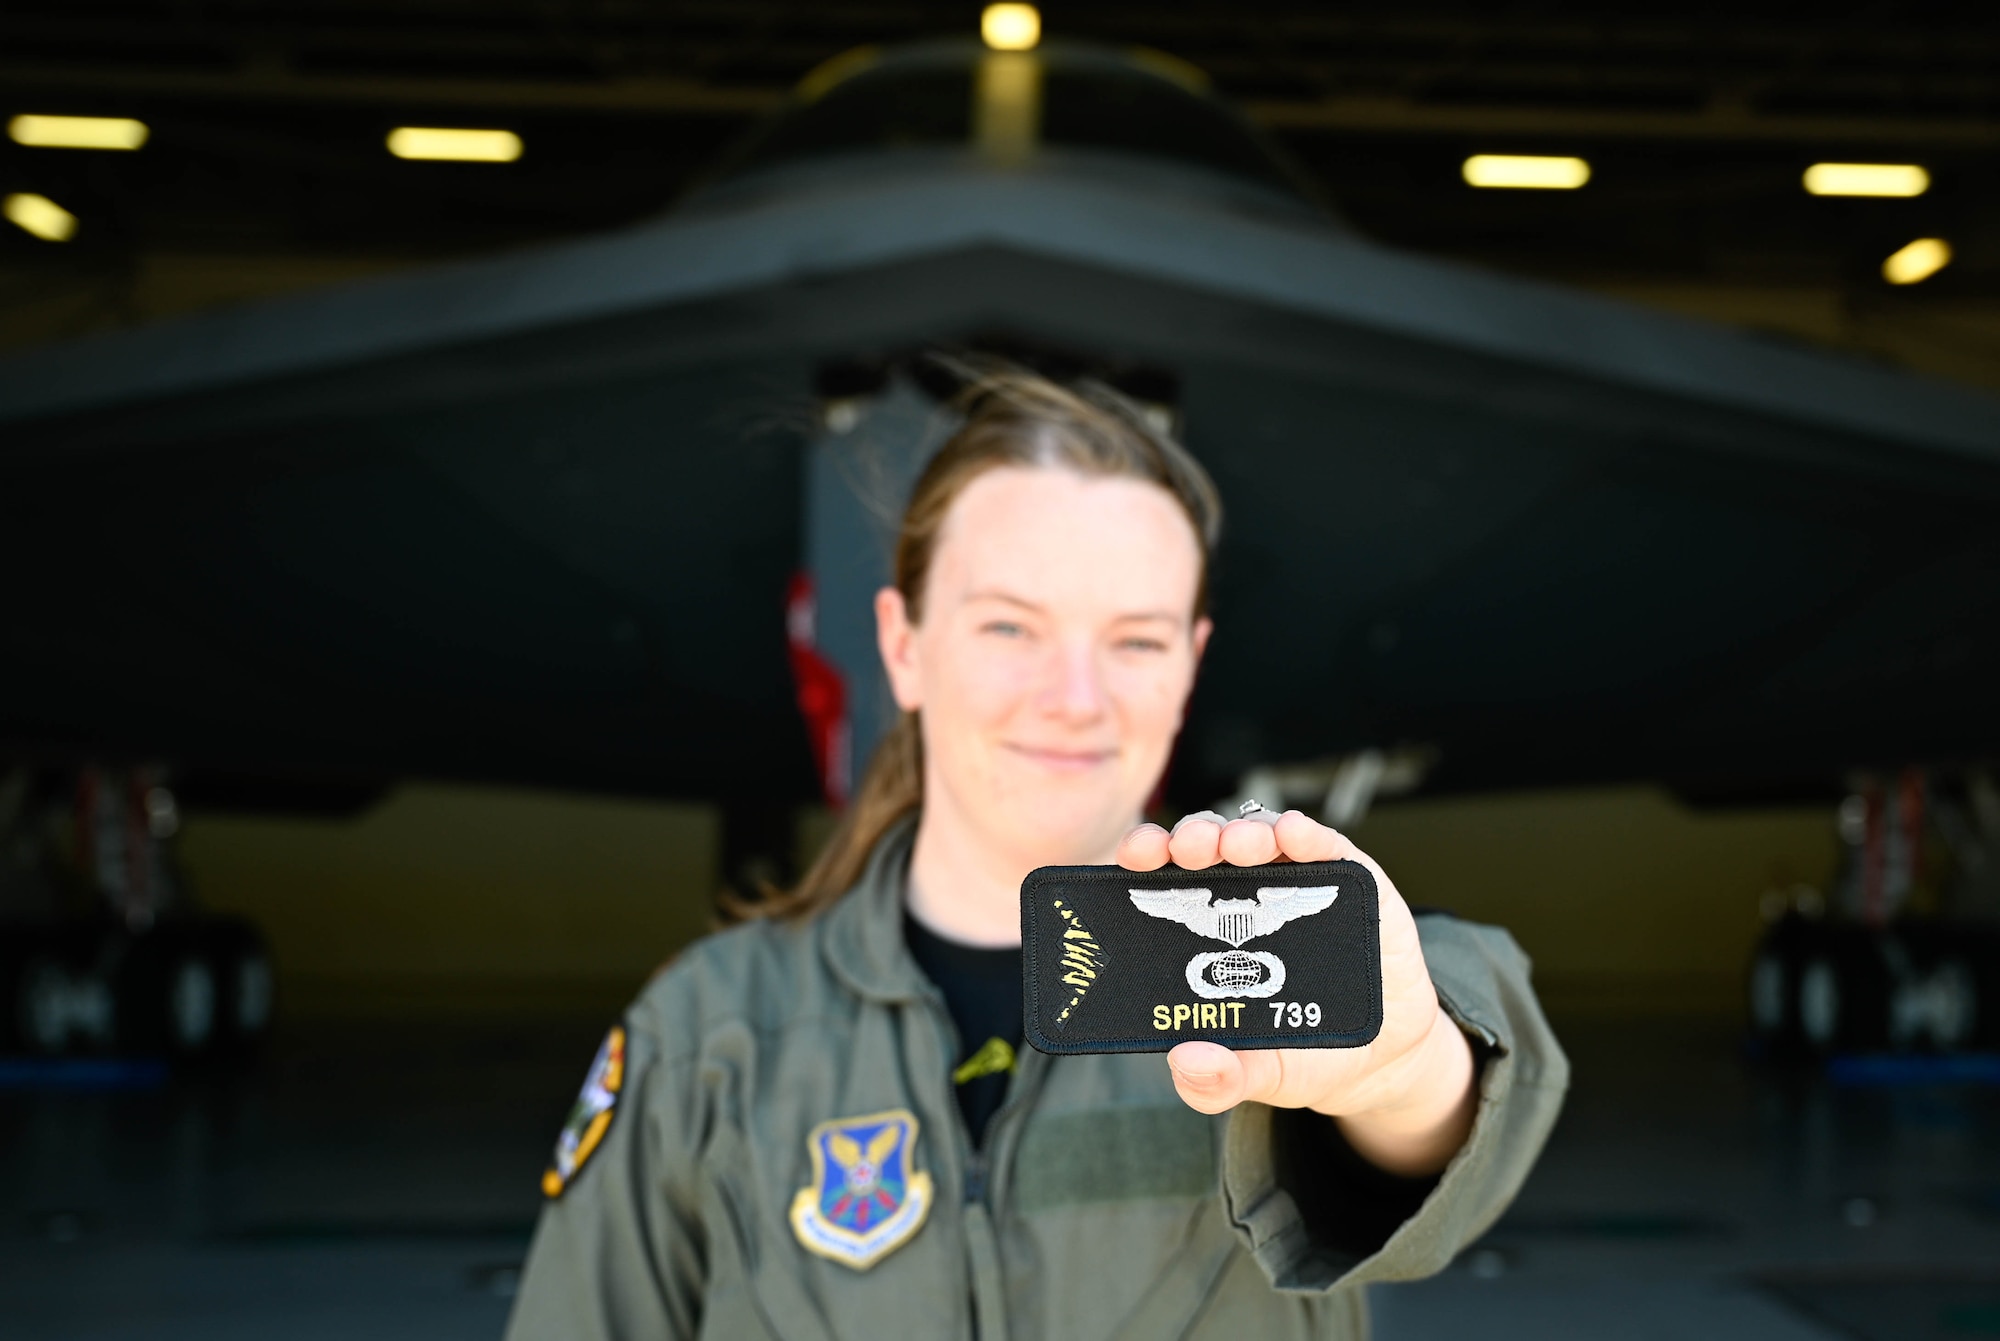 A U.S. Air Force B-2 Spirit pilot holds Spirit number patch for photo at Whiteman Air Force Base, Missouri, June 30, 2022. A Spirit number is a sequential number that is assigned only to a person who has flown in the B-2 Spirit Stealth Bomber. After completing their training, B-2 pilots take their first flight in the stealth bomber and receive their Spirit number. (U.S Air Force Photo by Senior Airman Christina Carter)